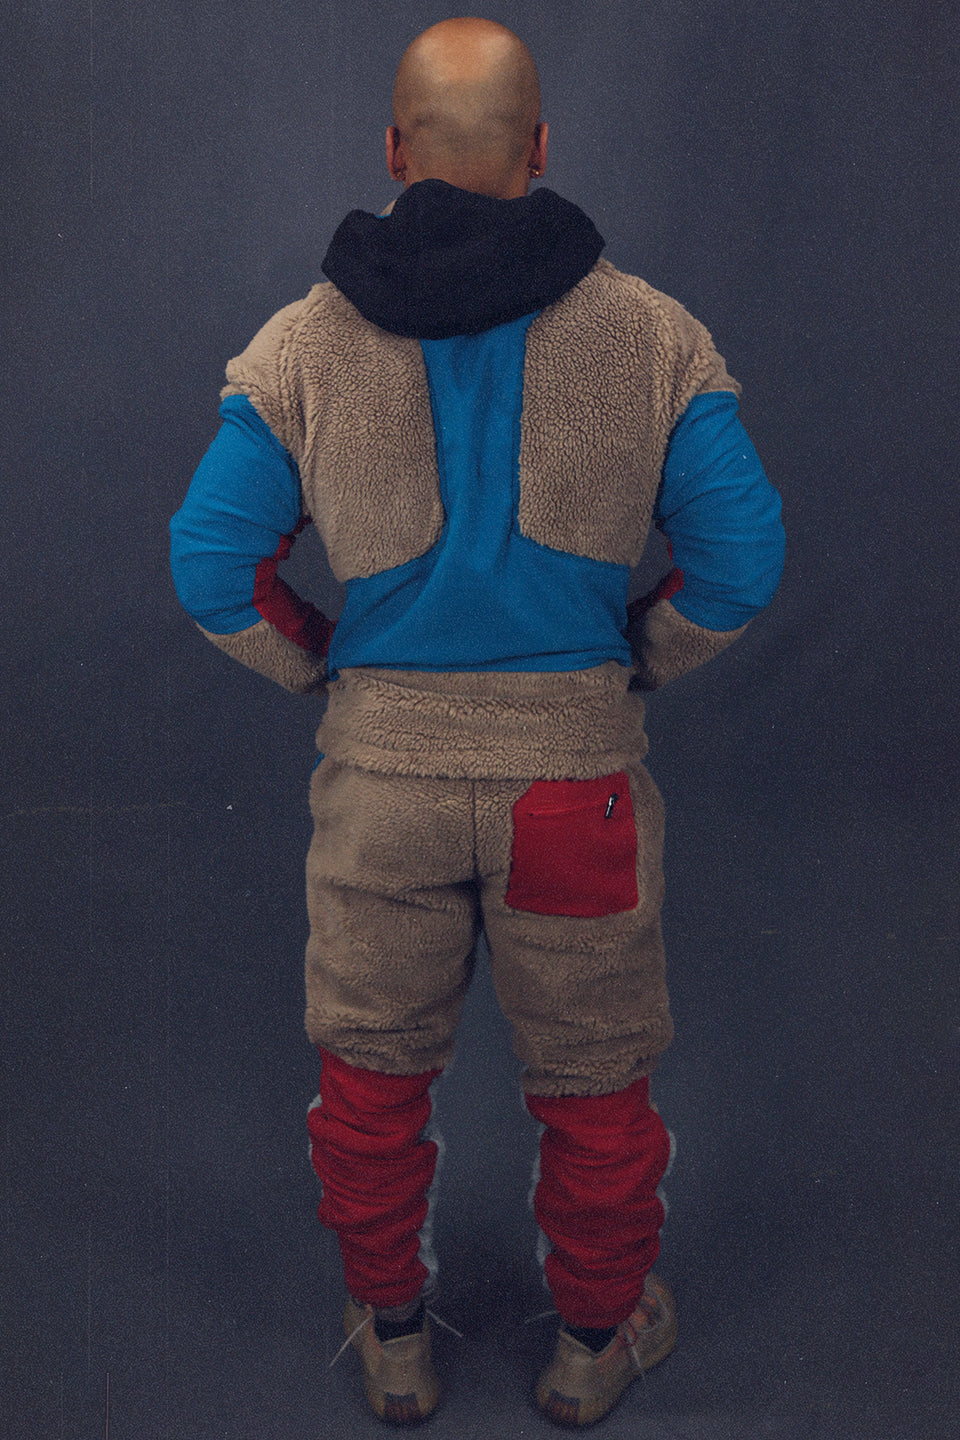 back of the matching Earth Sherpa Tech Jacket With Zipper Pockets For Sherpa Two Piece Set To Match Sneakers